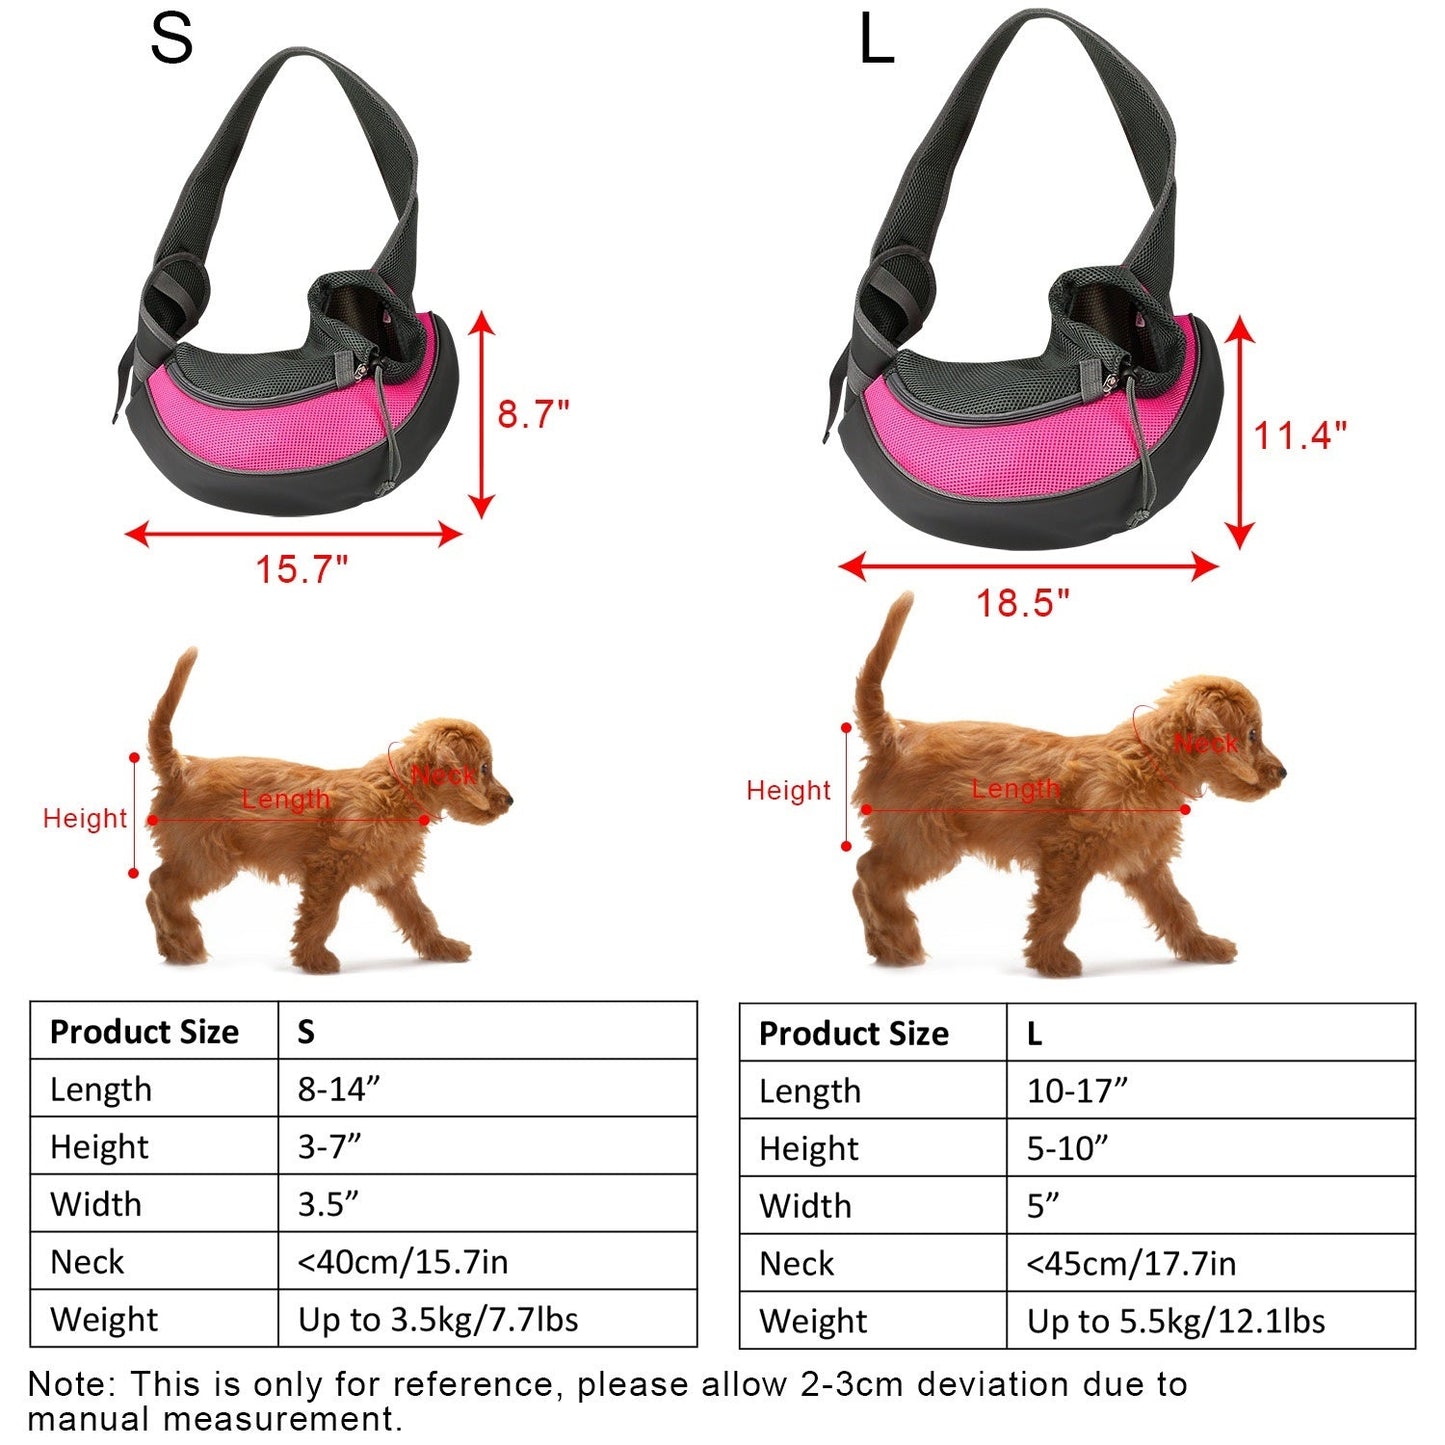 Carrier for Dogs Hand Free Sling Adjustable Padded Strap Tote